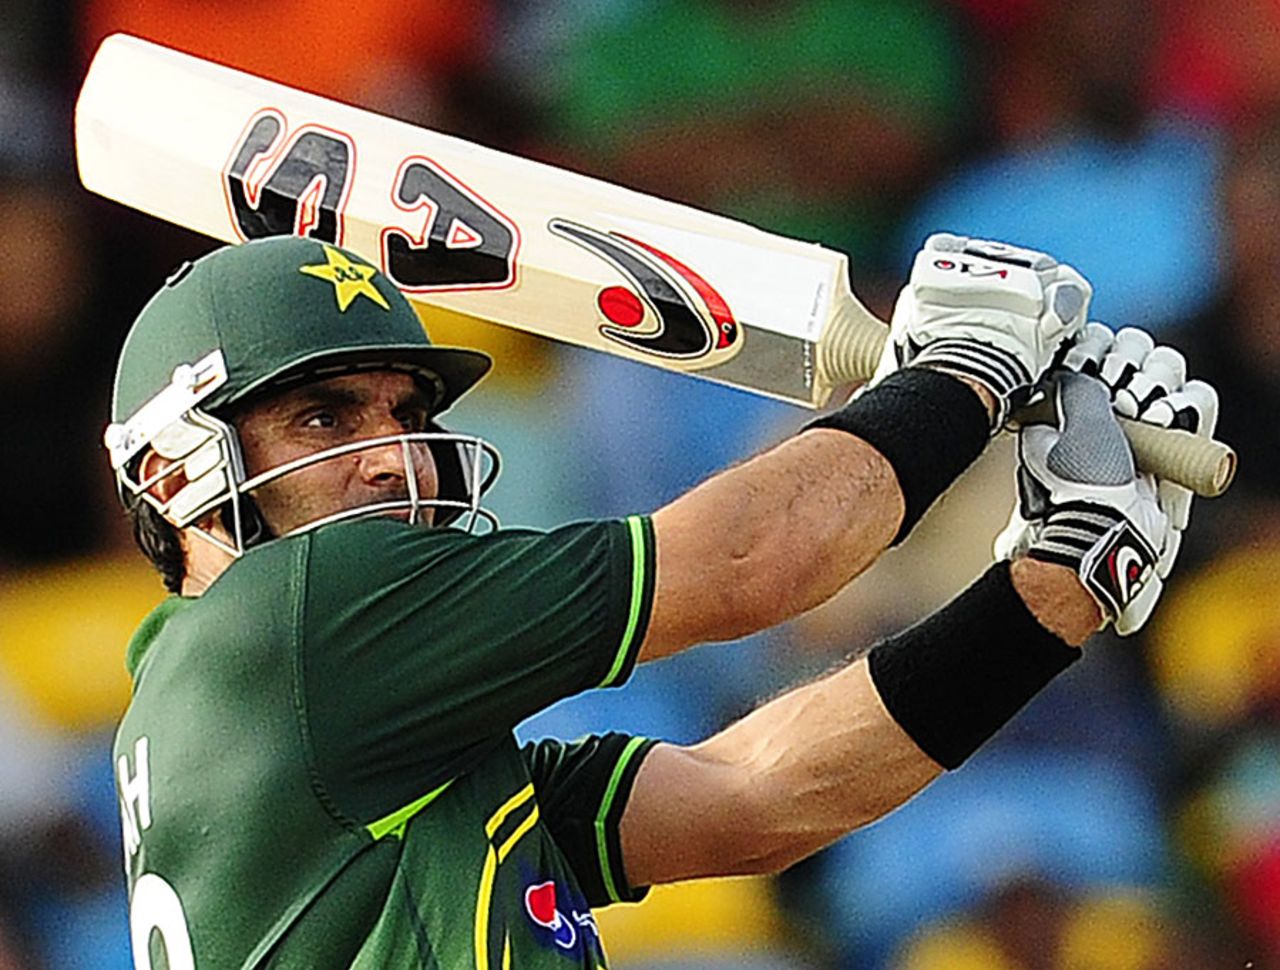 Misbah-ul-Haq played a steady hand in the run chase, West Indies v Pakistan, 3rd ODI, Barbados, April 28, 2011